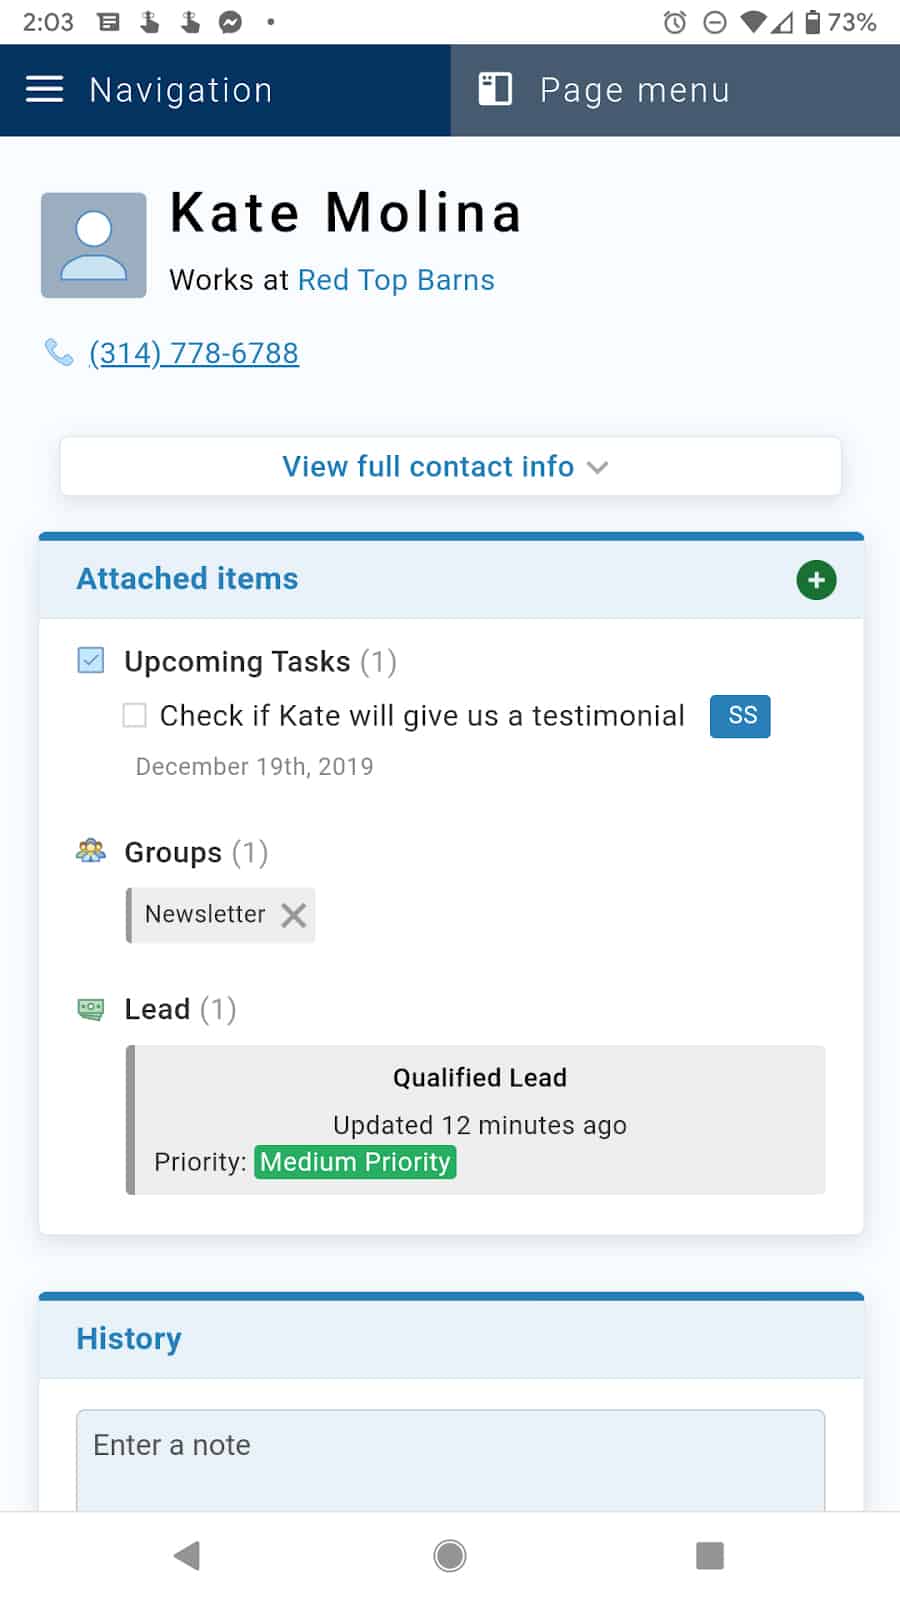 Image of Less Annoying CRM’s contact on mobile view of Kate Molina.